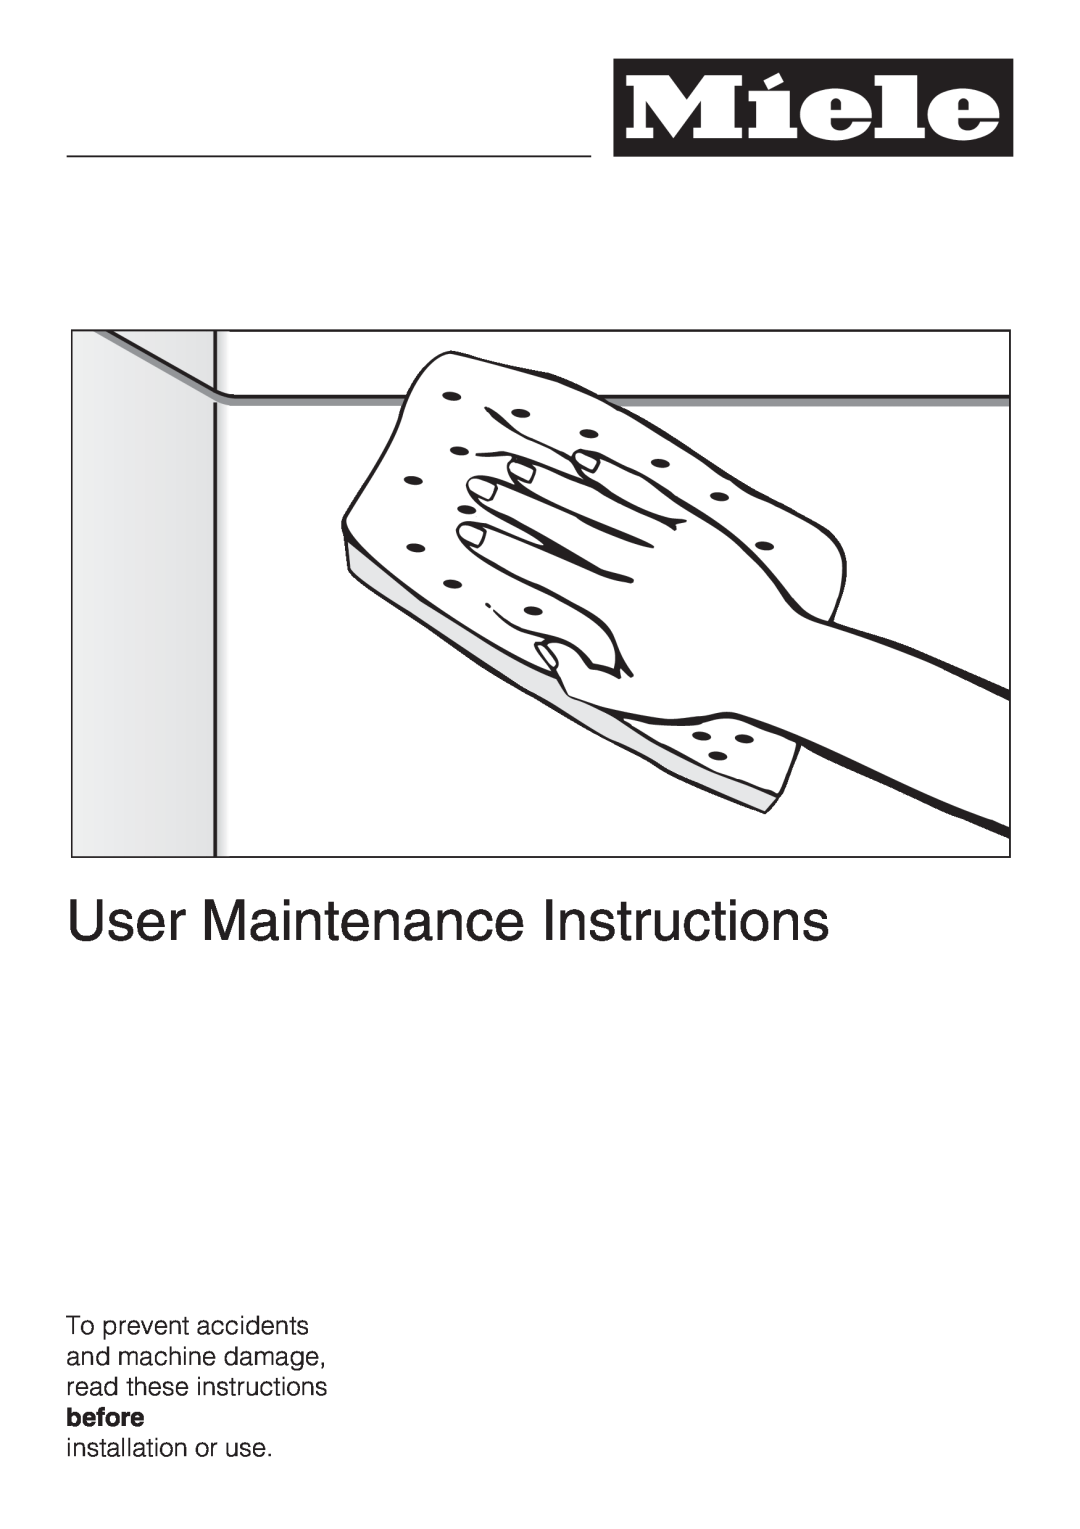 Miele G5600, G5605 manual User Maintenance Instructions, installation or use 